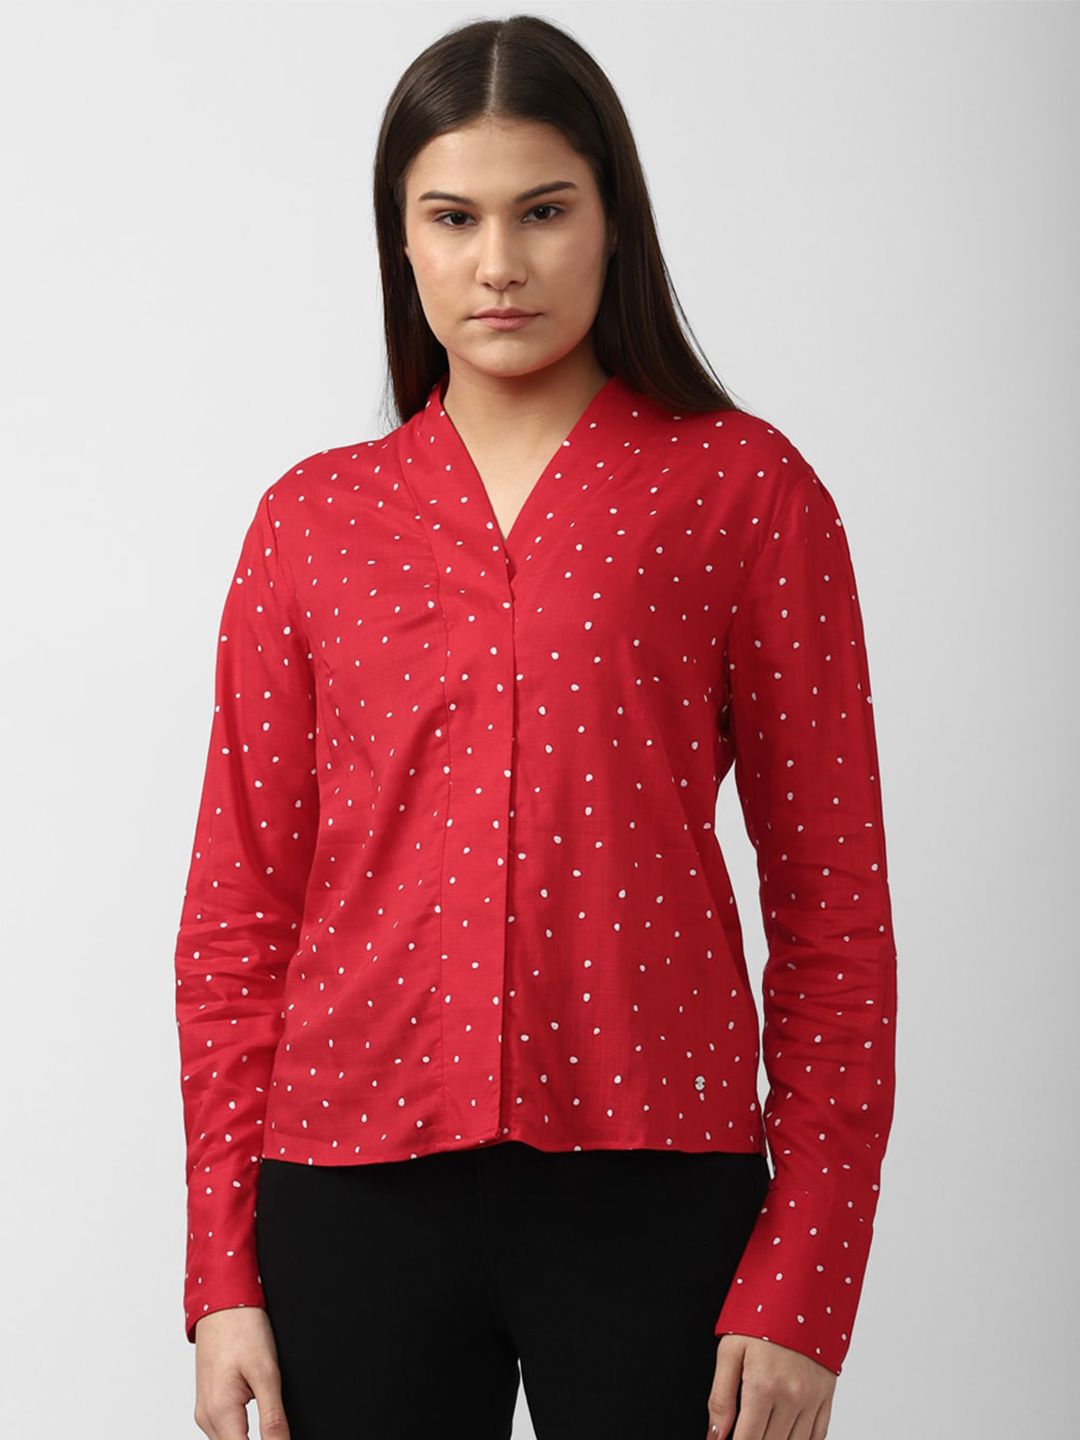 Van Heusen Woman Red & White Print Shirt Style Top Price in India